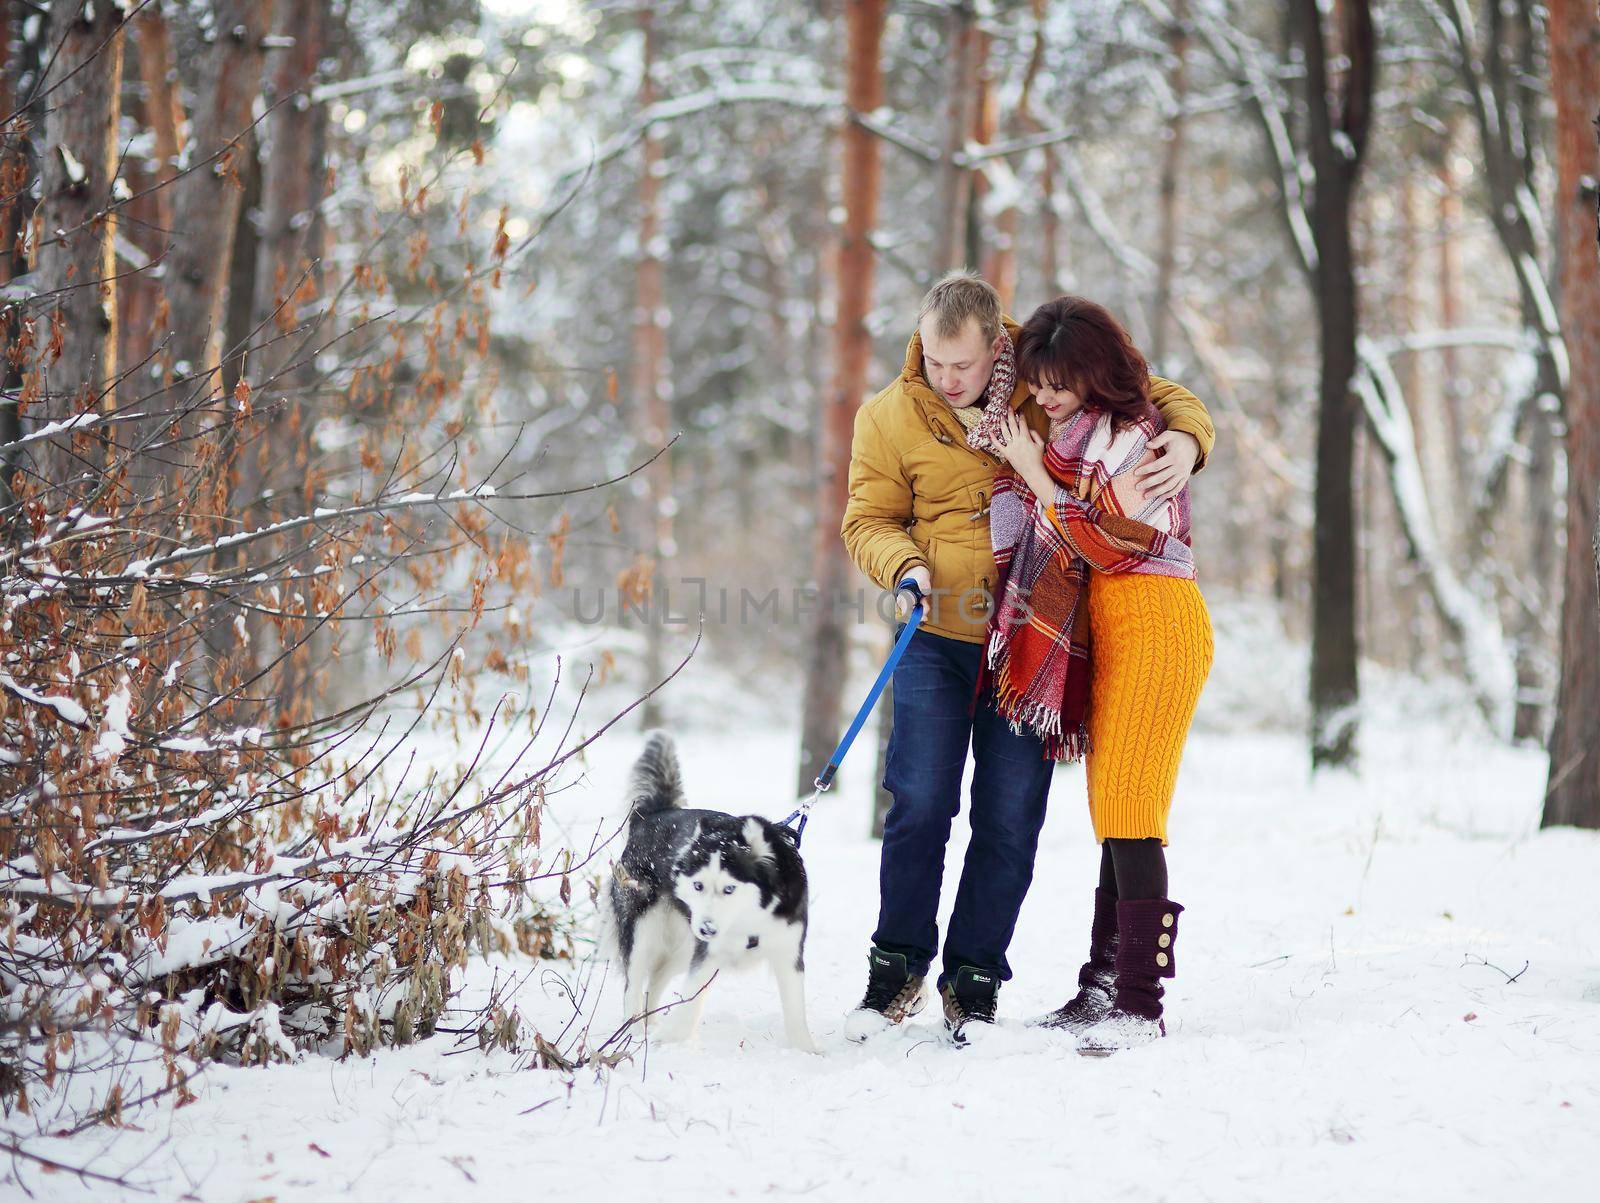 Young couple smiling and having fun in winter park with their husky dog.